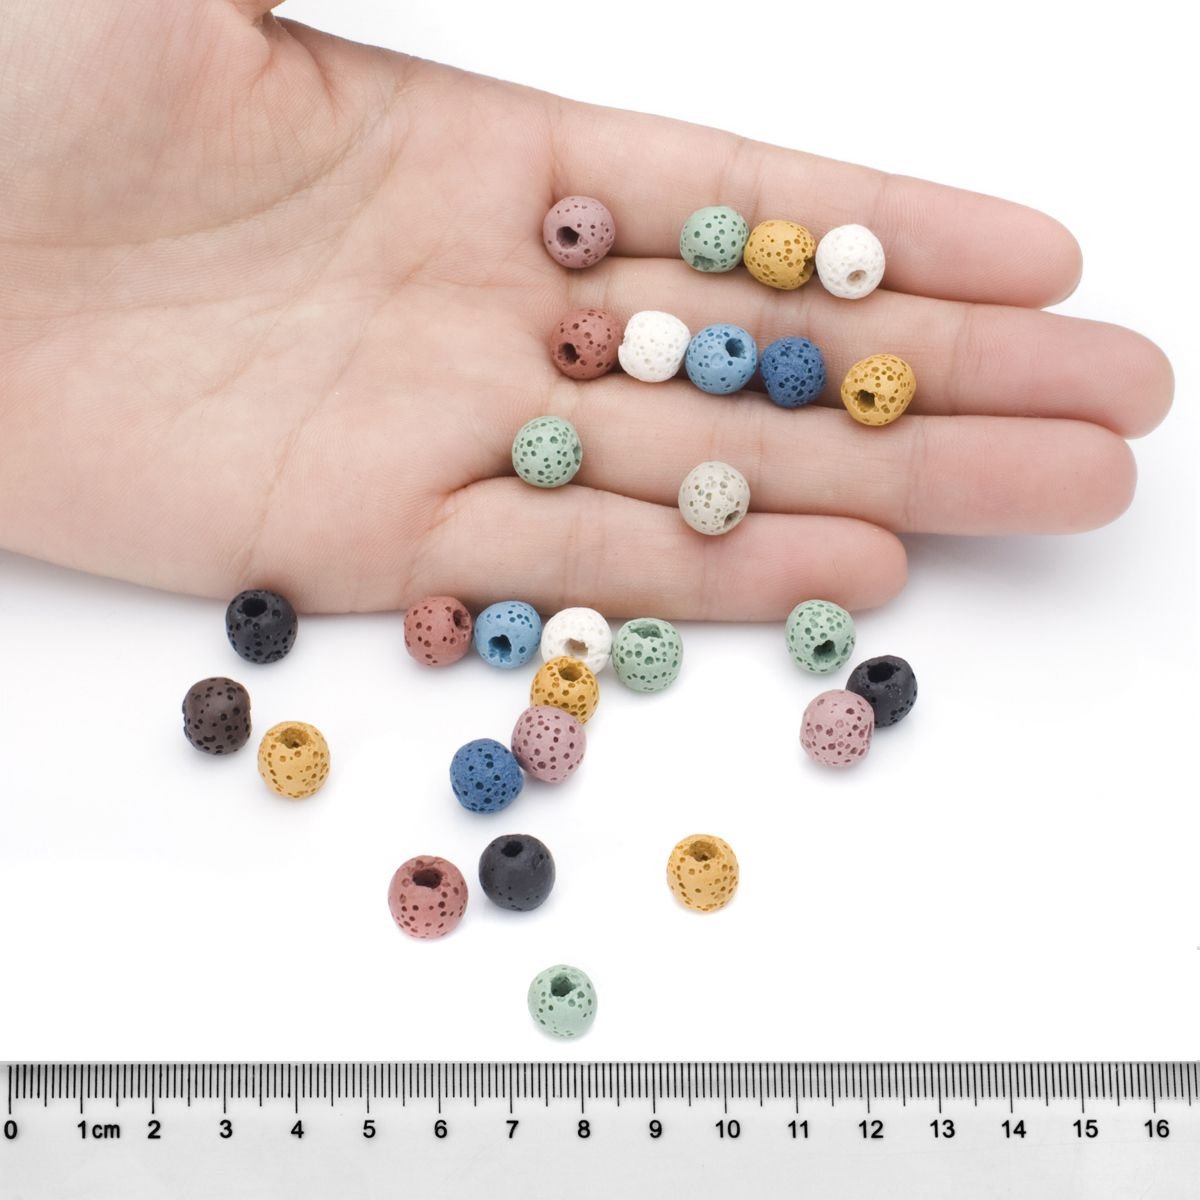 FEEIN 100pcs Original Natural Stone Beads Bulk Hole Size 1mm 8mm Genuine Real Gemstone Loose Beads Energy Stone Healing Power Smooth Beads for DIY Bracelet Necklace Jewelry Making for Adults 